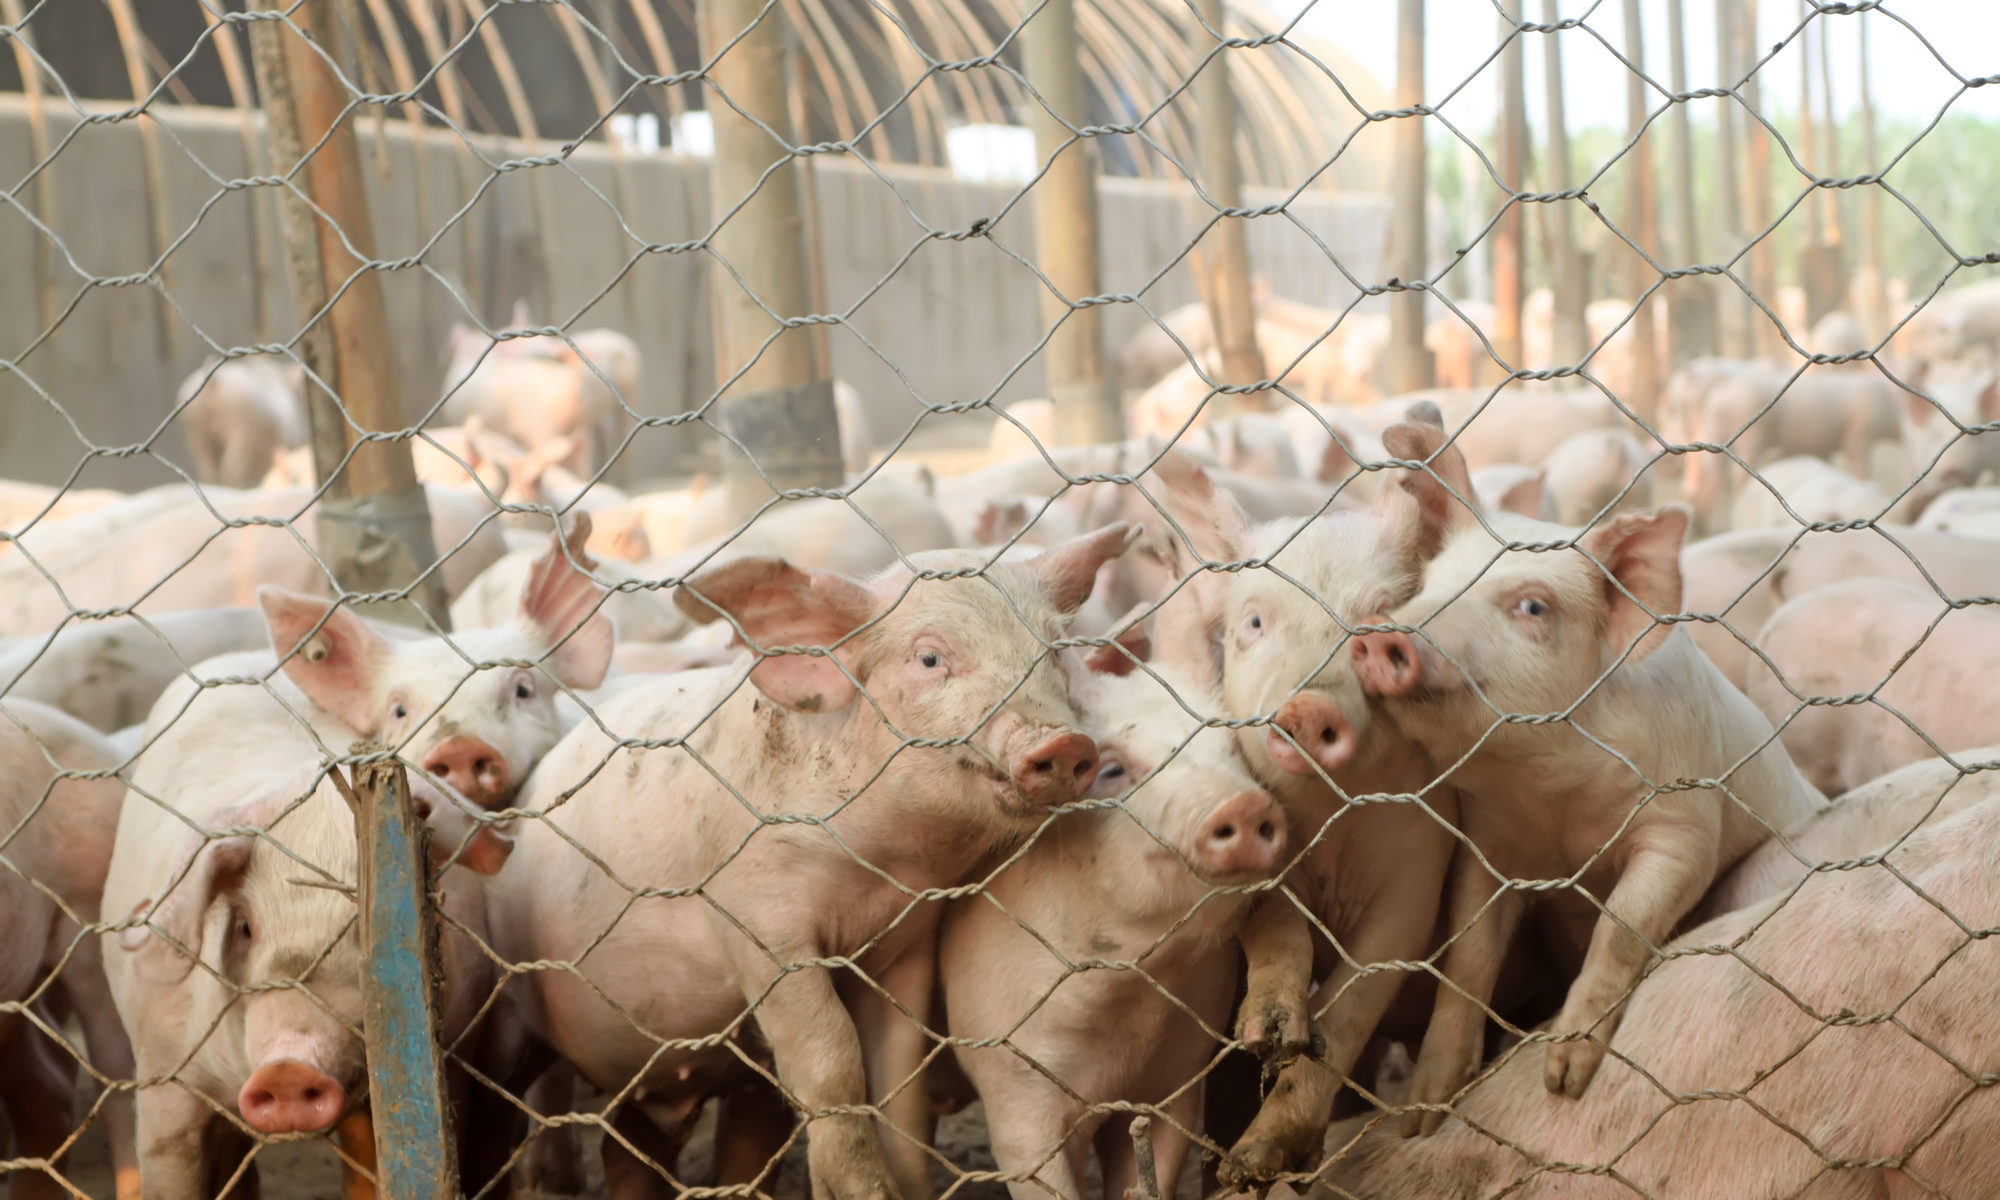 photograph of pigs vying to look out of chain-link pen